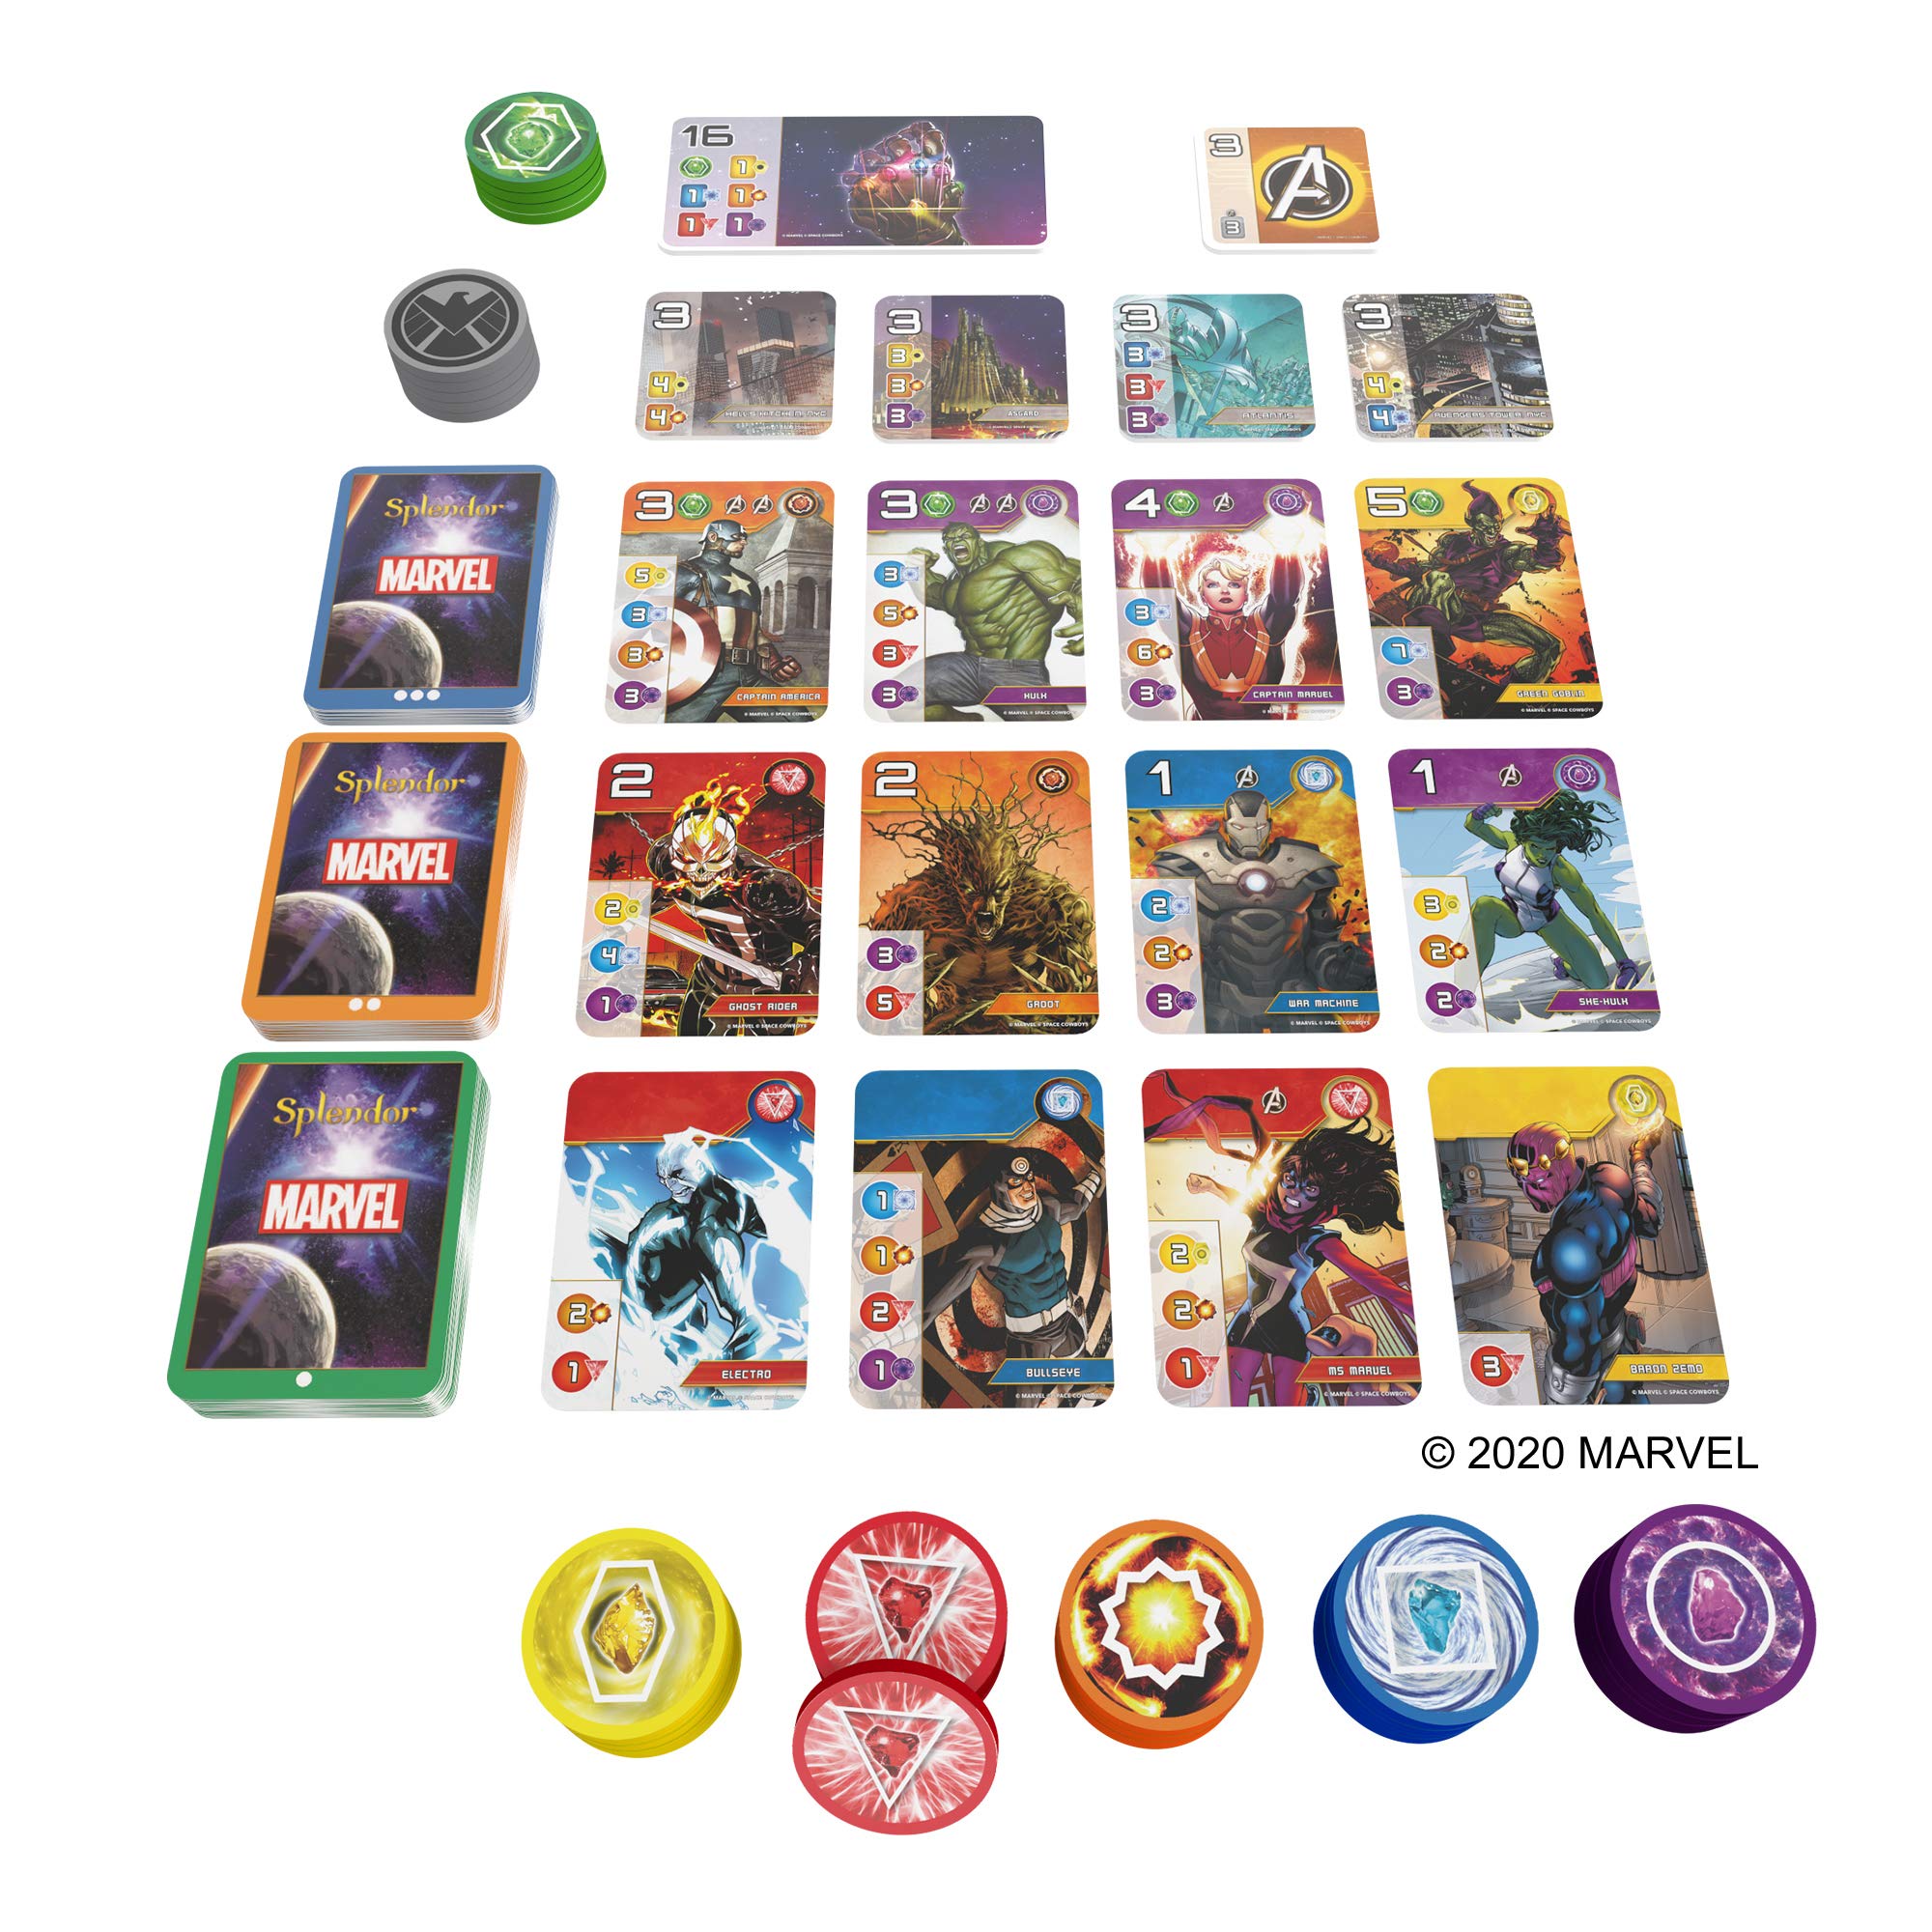 Marvel Splendor Board Game - Strategy Game for Kids and Adults, Fun Family Game Night Entertainment, Ages 10+, 2-4 Players, 30-Minute Playtime, Made by Space Cowboys